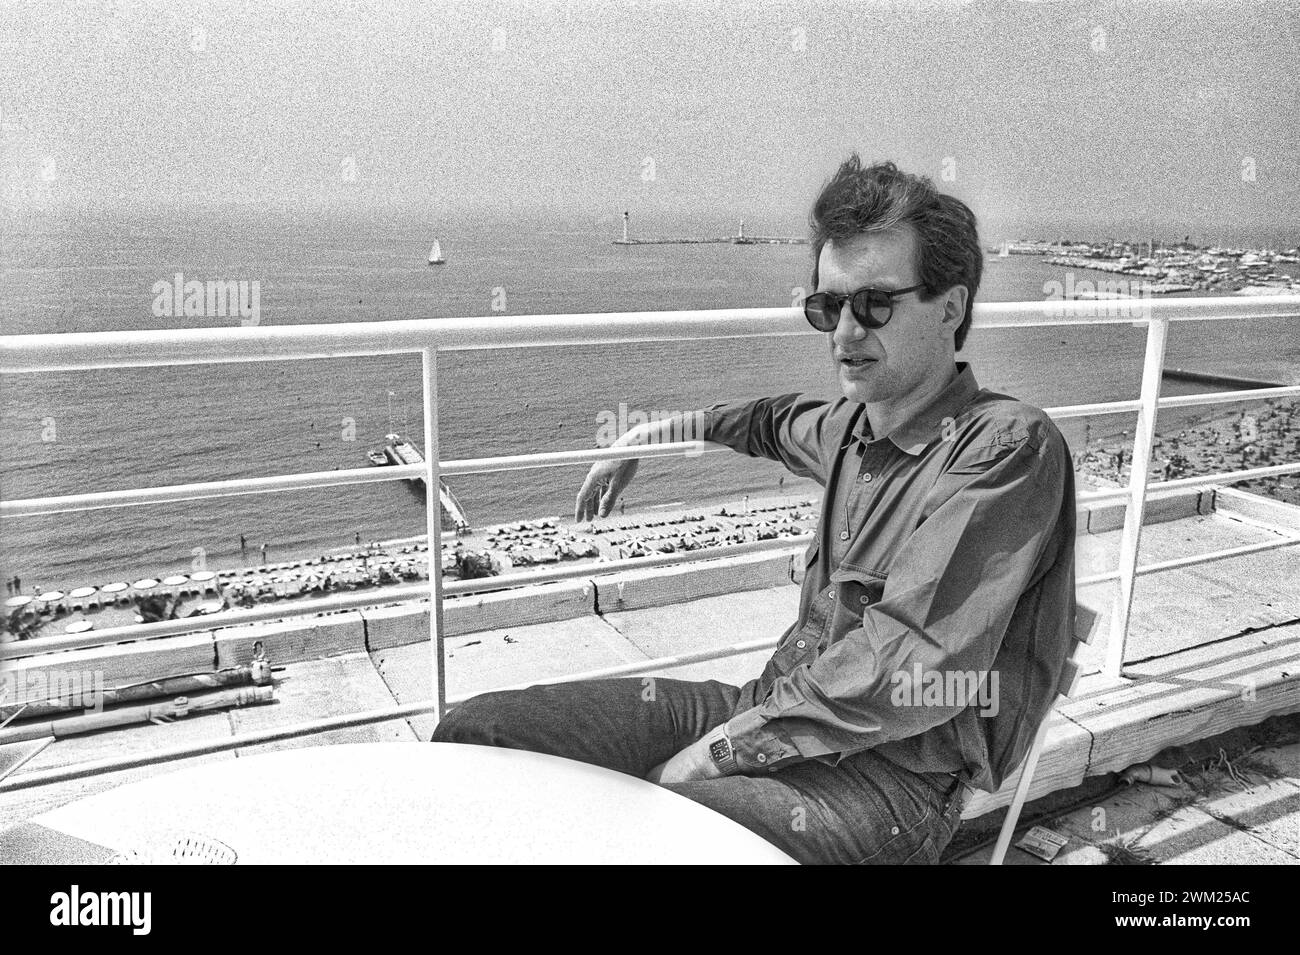 MME4779994 Cannes Film Festival 1980. German director Wim Wenders, at the festival out of competition with the movie “Lightning Over Water””, on the terrace of the old Cinema Palace/Festival del Cinema di Canes 1980. He registered Wim Wenders, the Festival fuori concorso con il film “” Lightning Over Water””, sulla terrazzzzo del vecchio palazzo del Cinema -; (add.info.: Cannes Film Festival 1980. German director Wim Wenders, at the festival out of competition with the movie “Lightning Over Water””, on the terrace of the old Cinema Palace/Festival del Cinema di Canes 1980. He registered Wim We Stock Photo